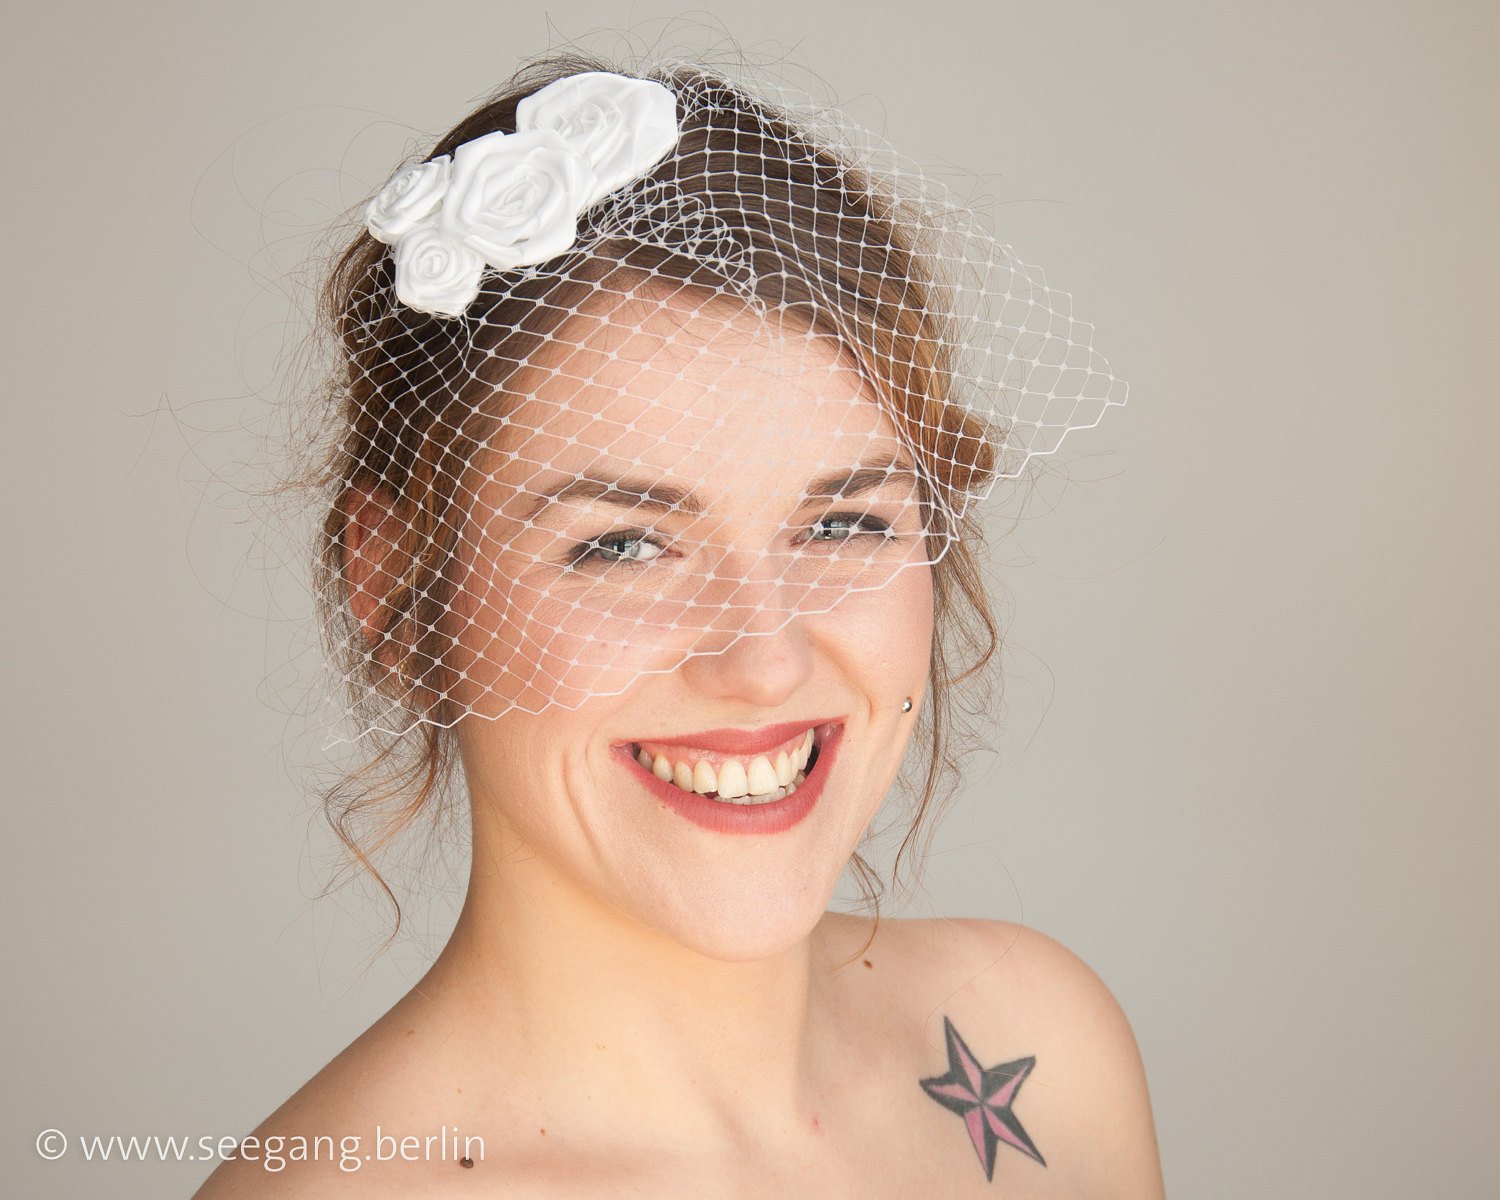 BIRDCAGE - BRIDAL VEIL HEADDRESS WITH ROSES IN SHADES OFF WHITE, CREME, IVORY AND CHAMPAGNE © Seegang Berlin